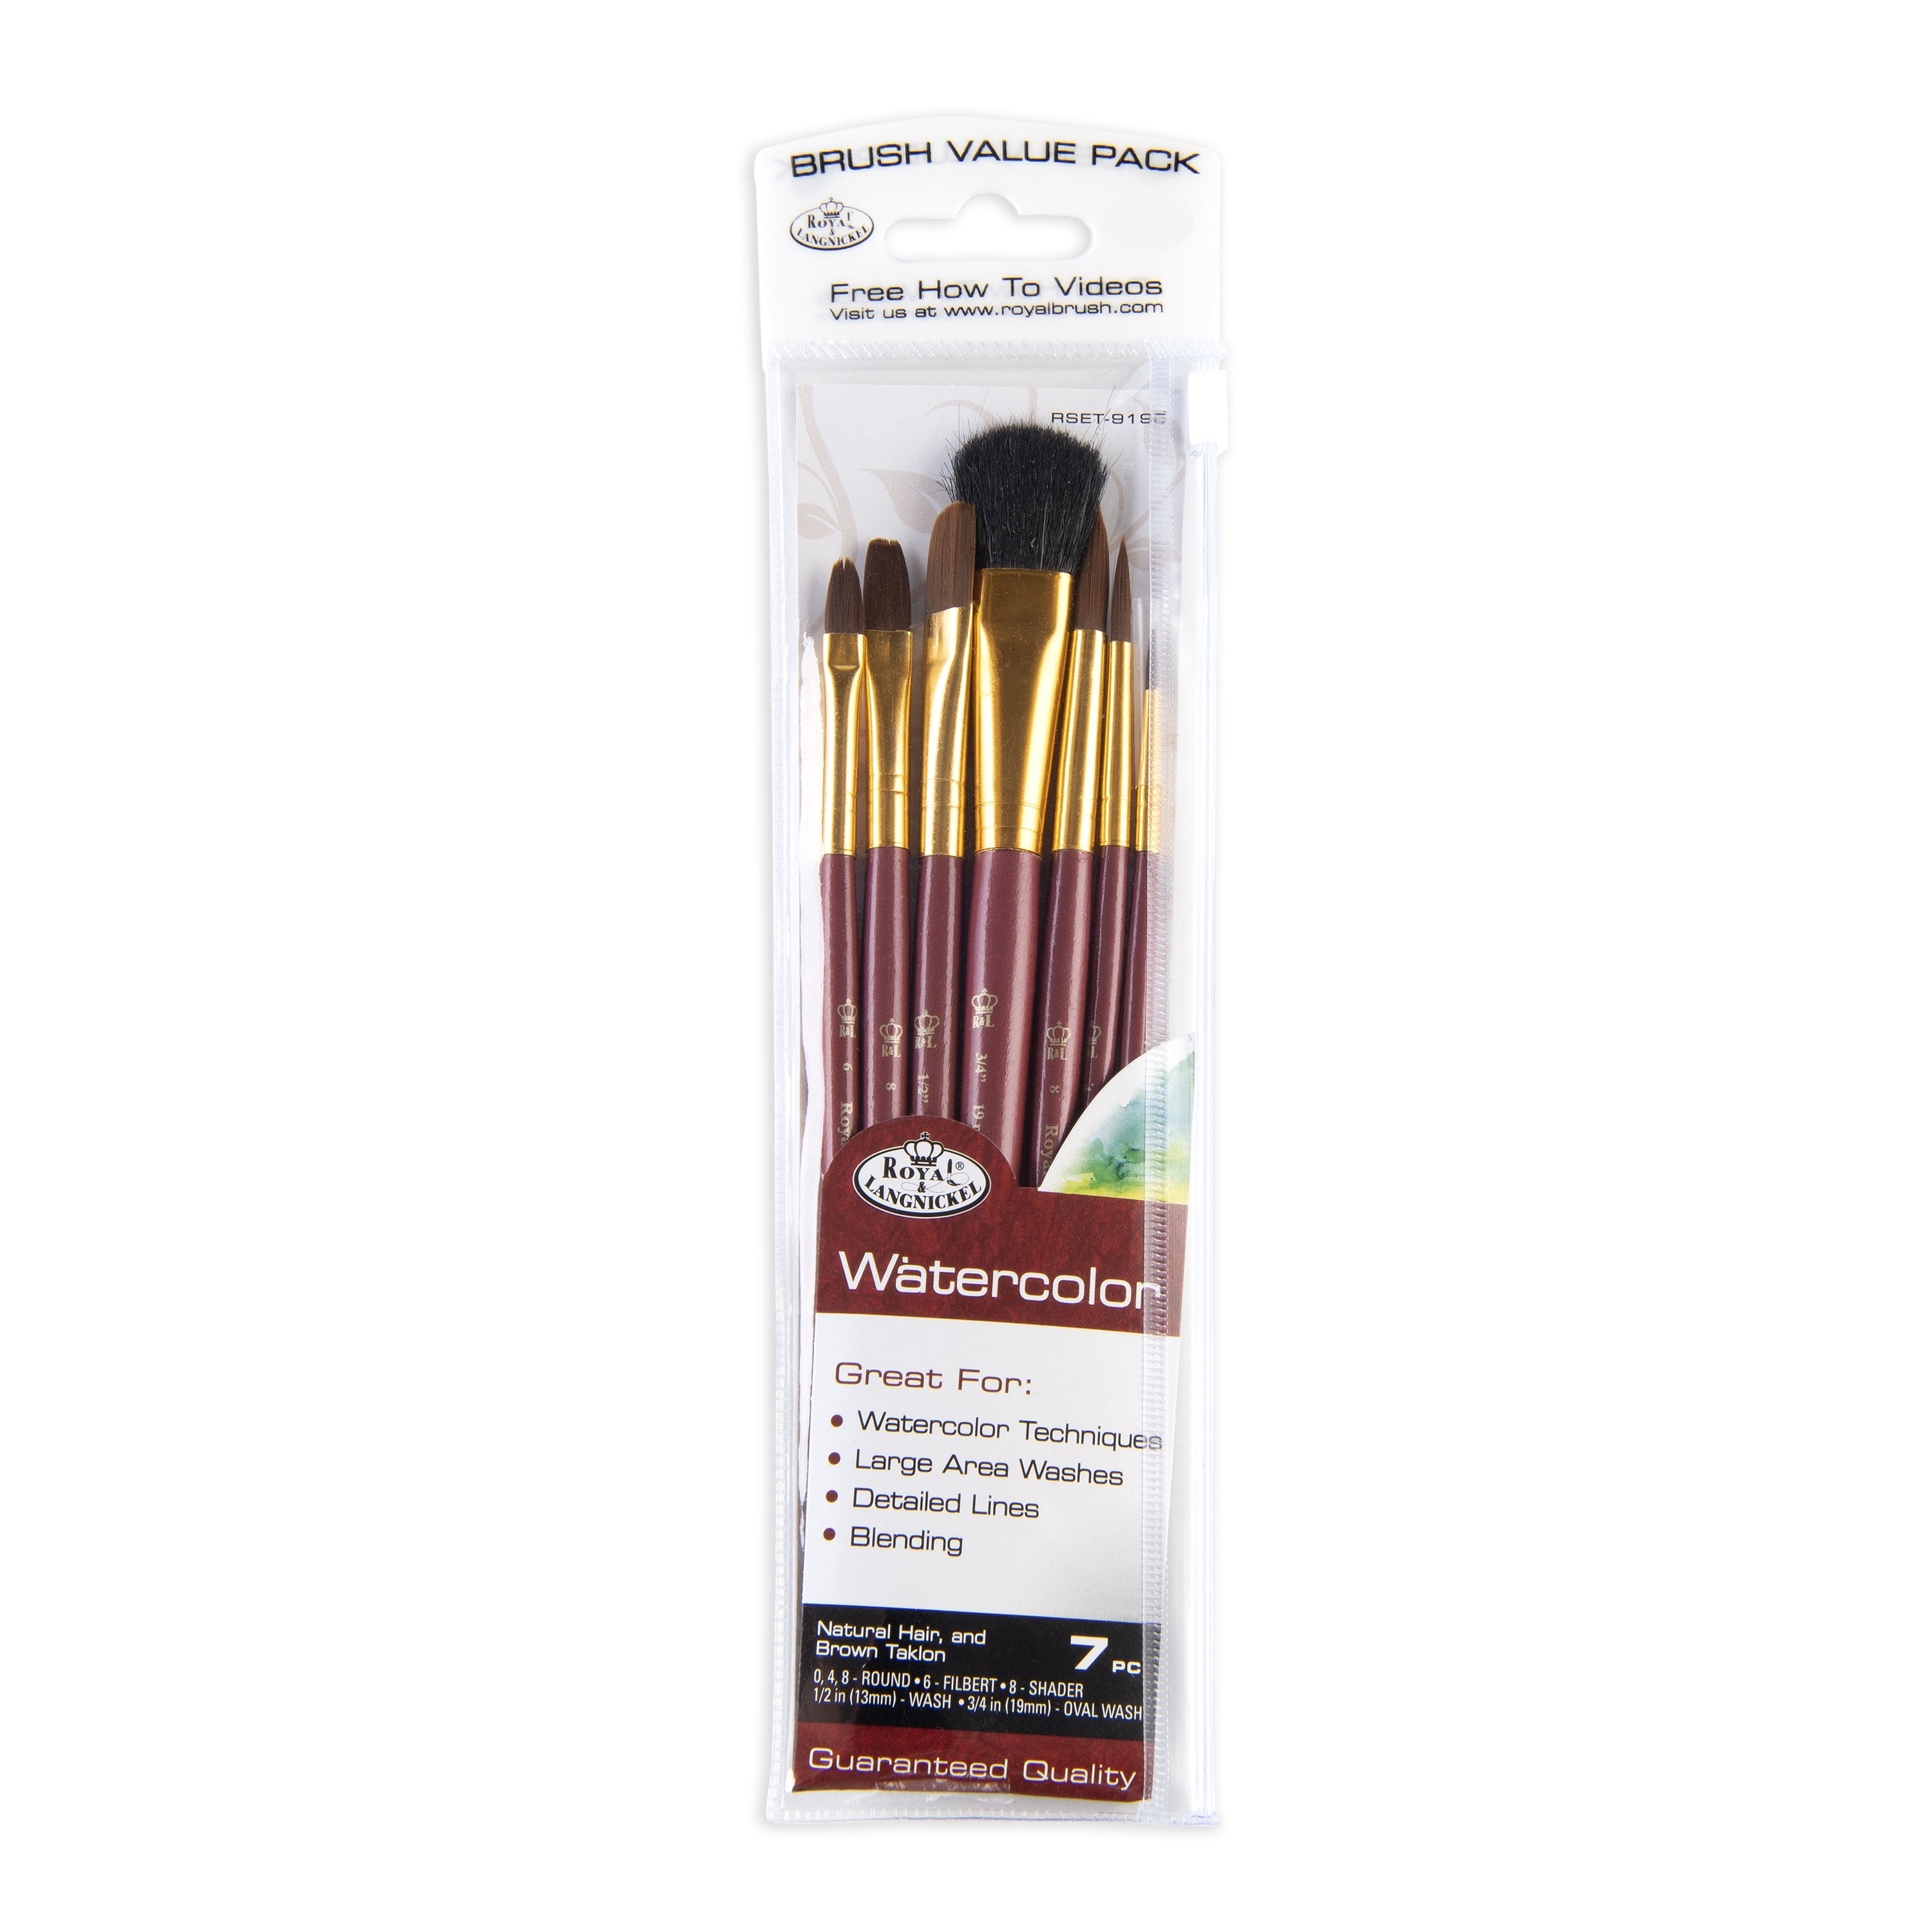 Perfect for Arts and Crafts Indoor and Outdoor Projects and More! Set of 12 Foam Paint Brushes W/ Plastic Handle Ranging From 1W to 4W Features 4 Different Sizes 